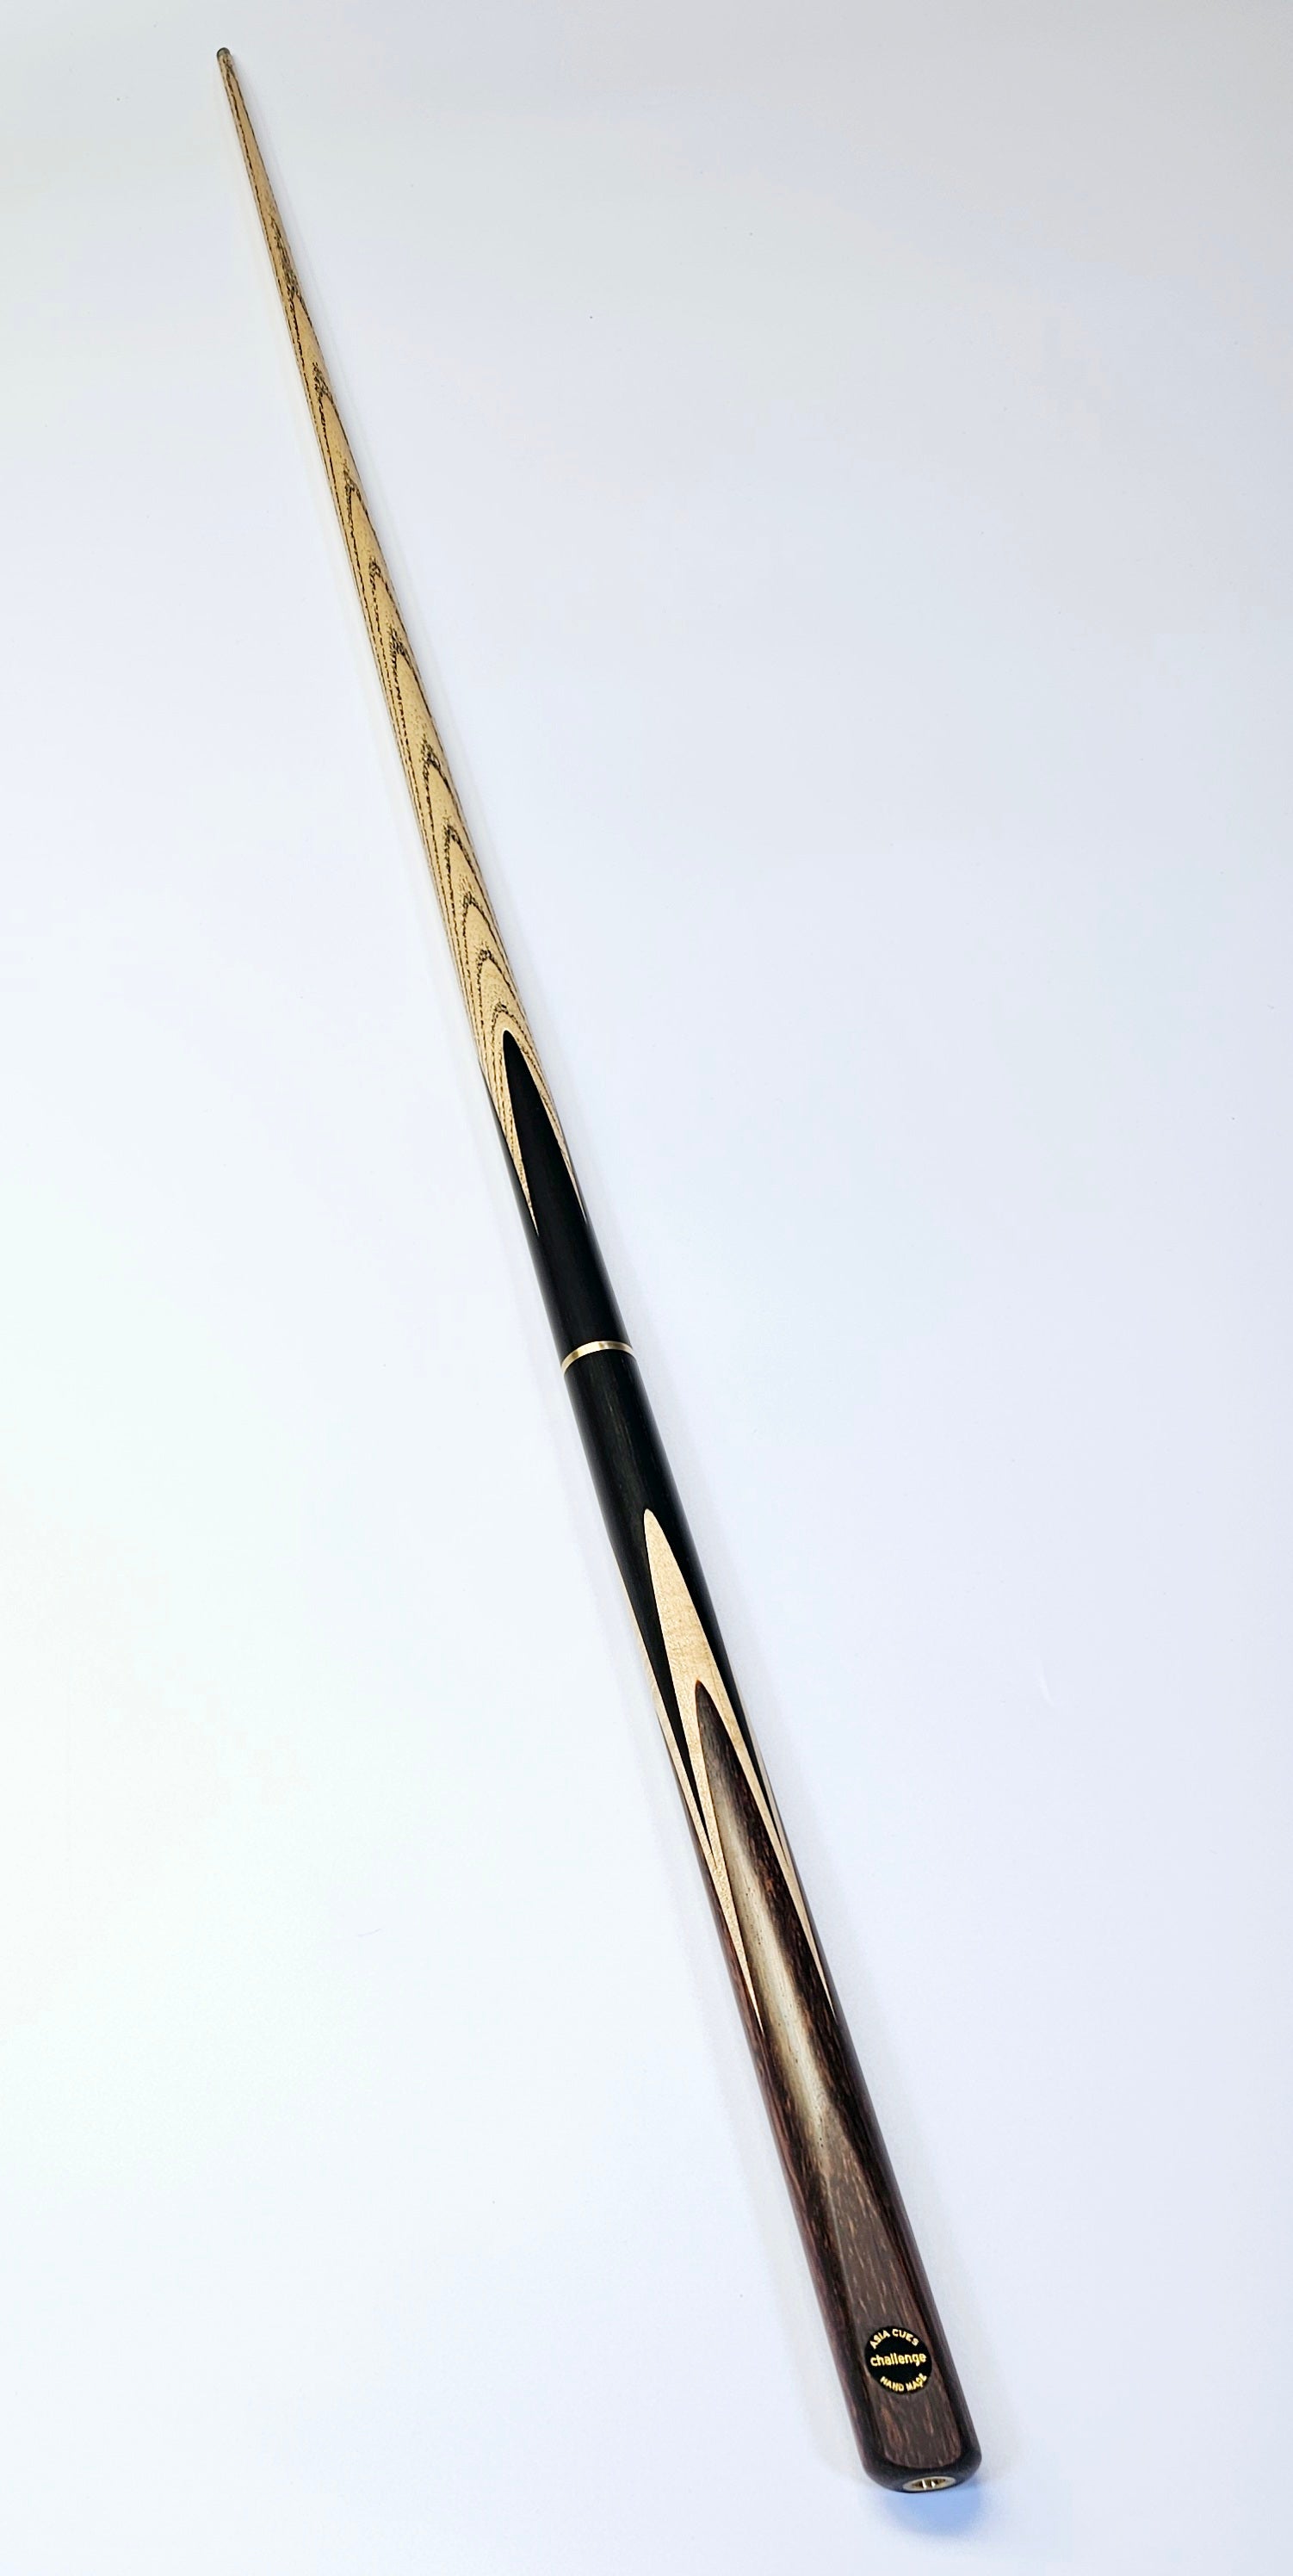 Asia Cues Challenge - 3/4 Jointed Snooker Cue 9.5mm Tip, 17.7oz, 58" *SOLD*